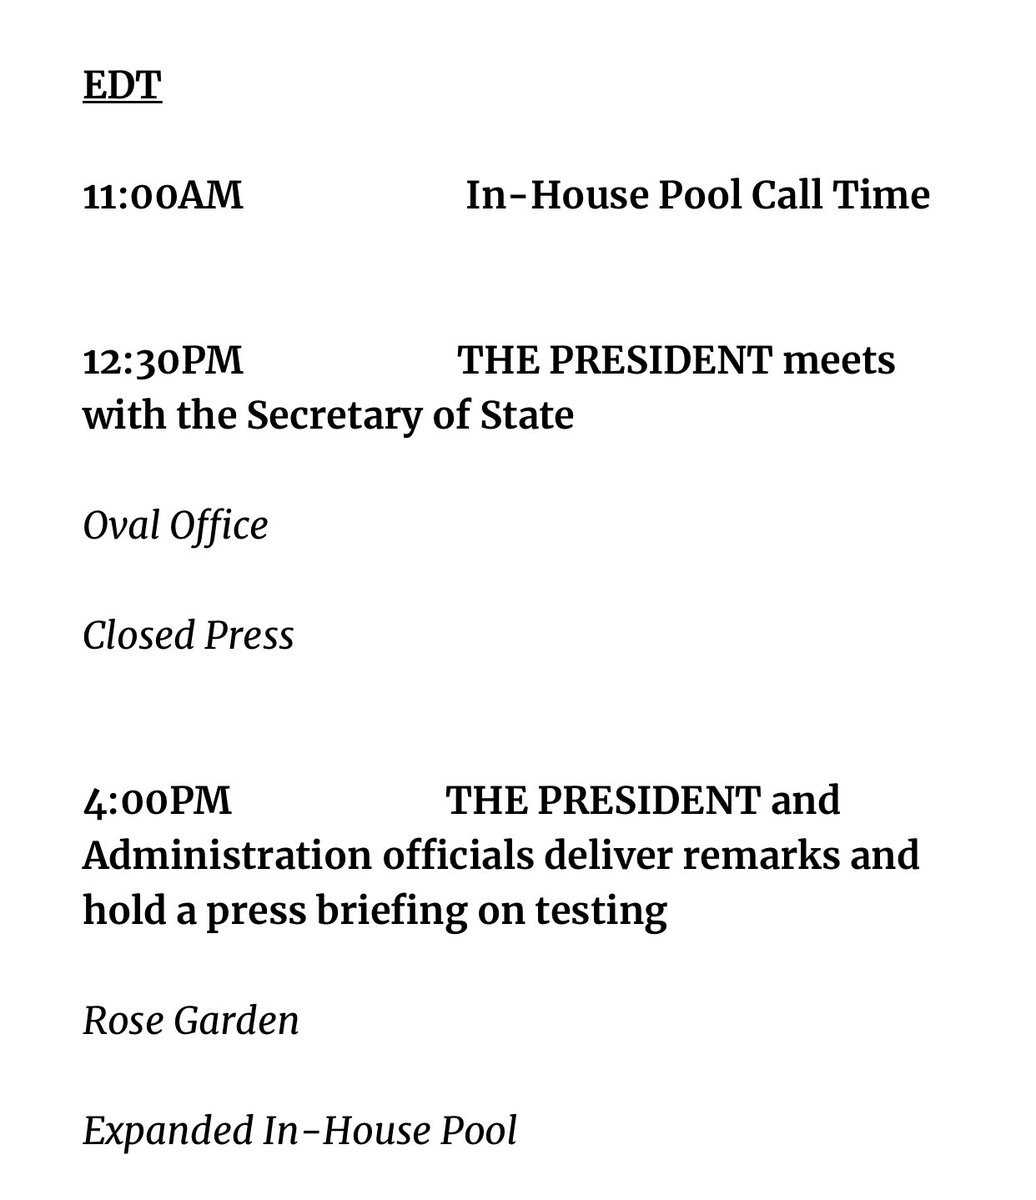 JUST IN: The President will hold a formal press briefing tomorrow for the first time since April 27th. The topic is “testing”, which great because I have a lot of questions.